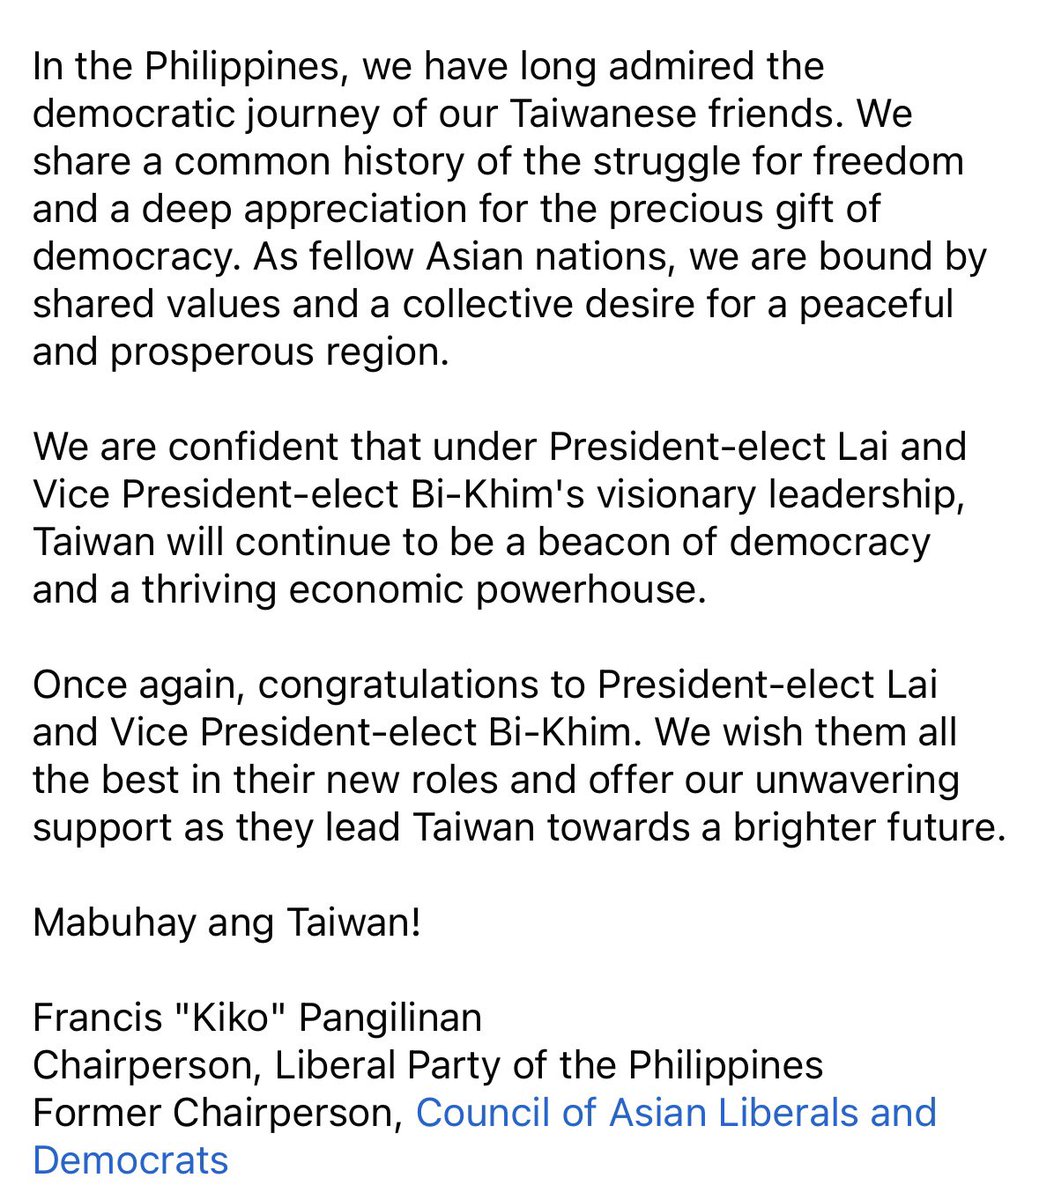 Message of congratulations to President-elect William Lai (@ChingteLai) and Vice President-elect Bi-Khim Hsiao (@bikhim) in the recently concluded elections in Taiwan: